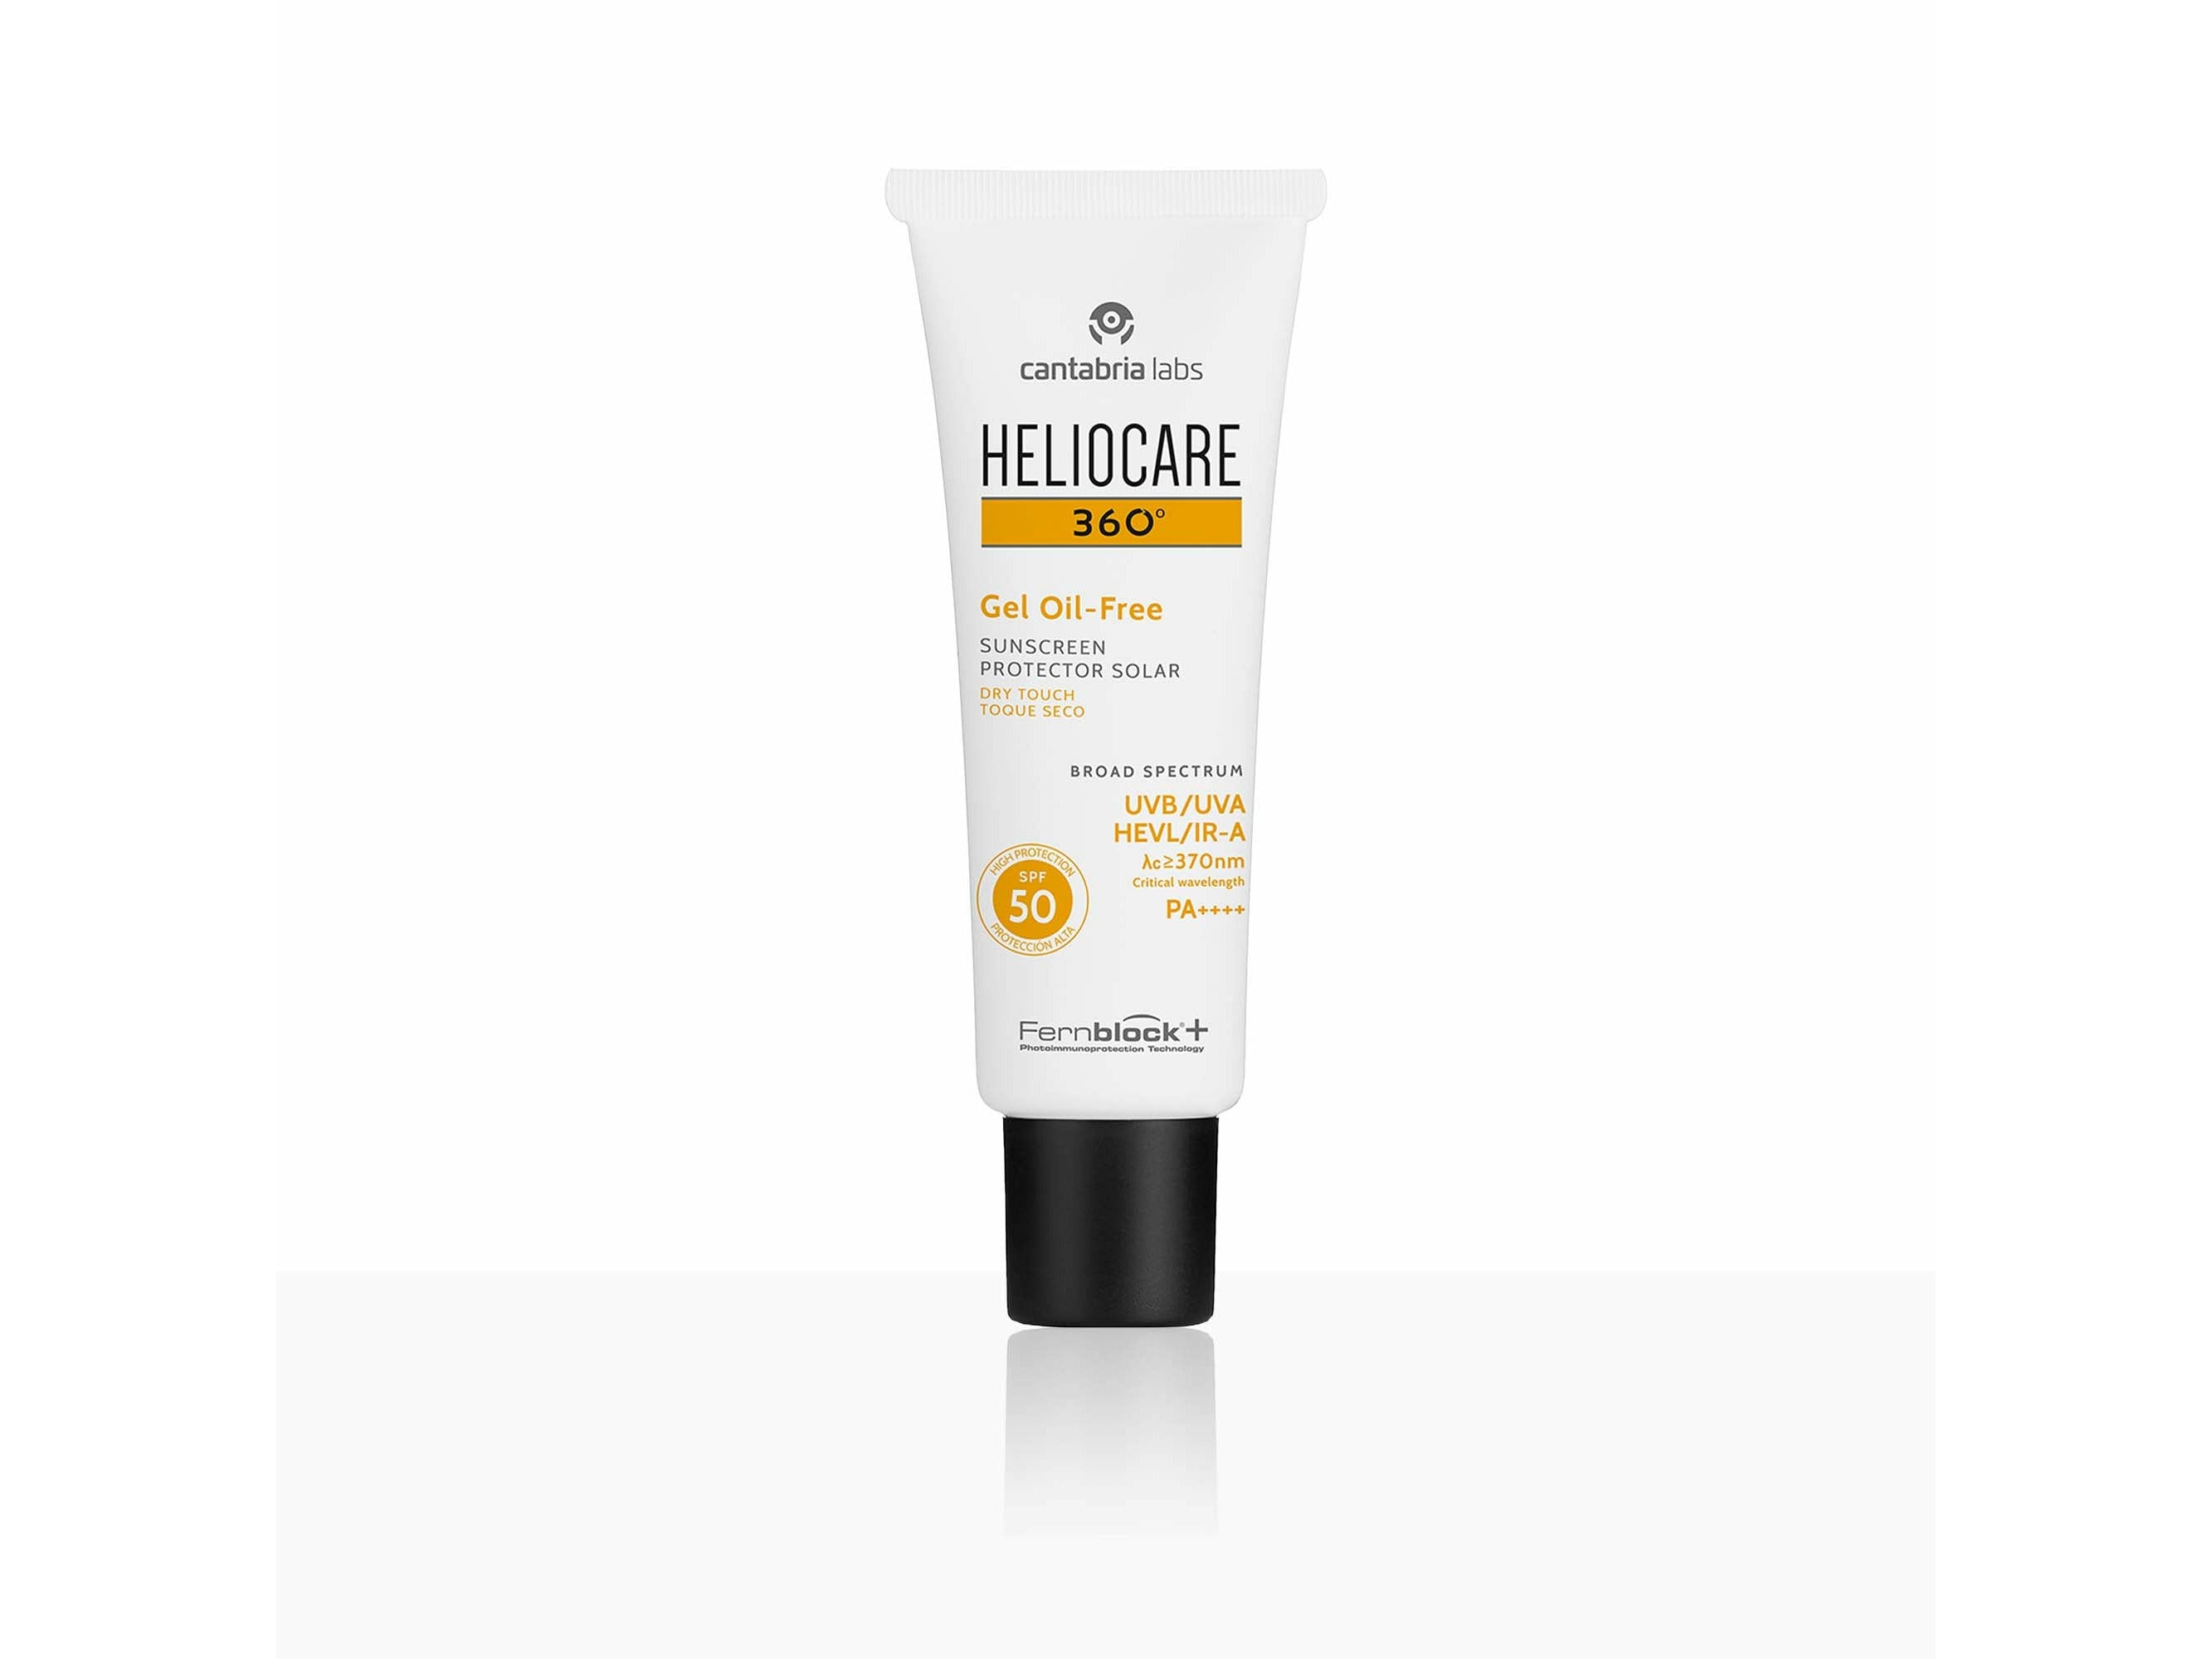 Heliocare 360 Gel Oil-Free Sunscreen Protector Solar Dry Touch SPF 50/PA++++ - Clinikally